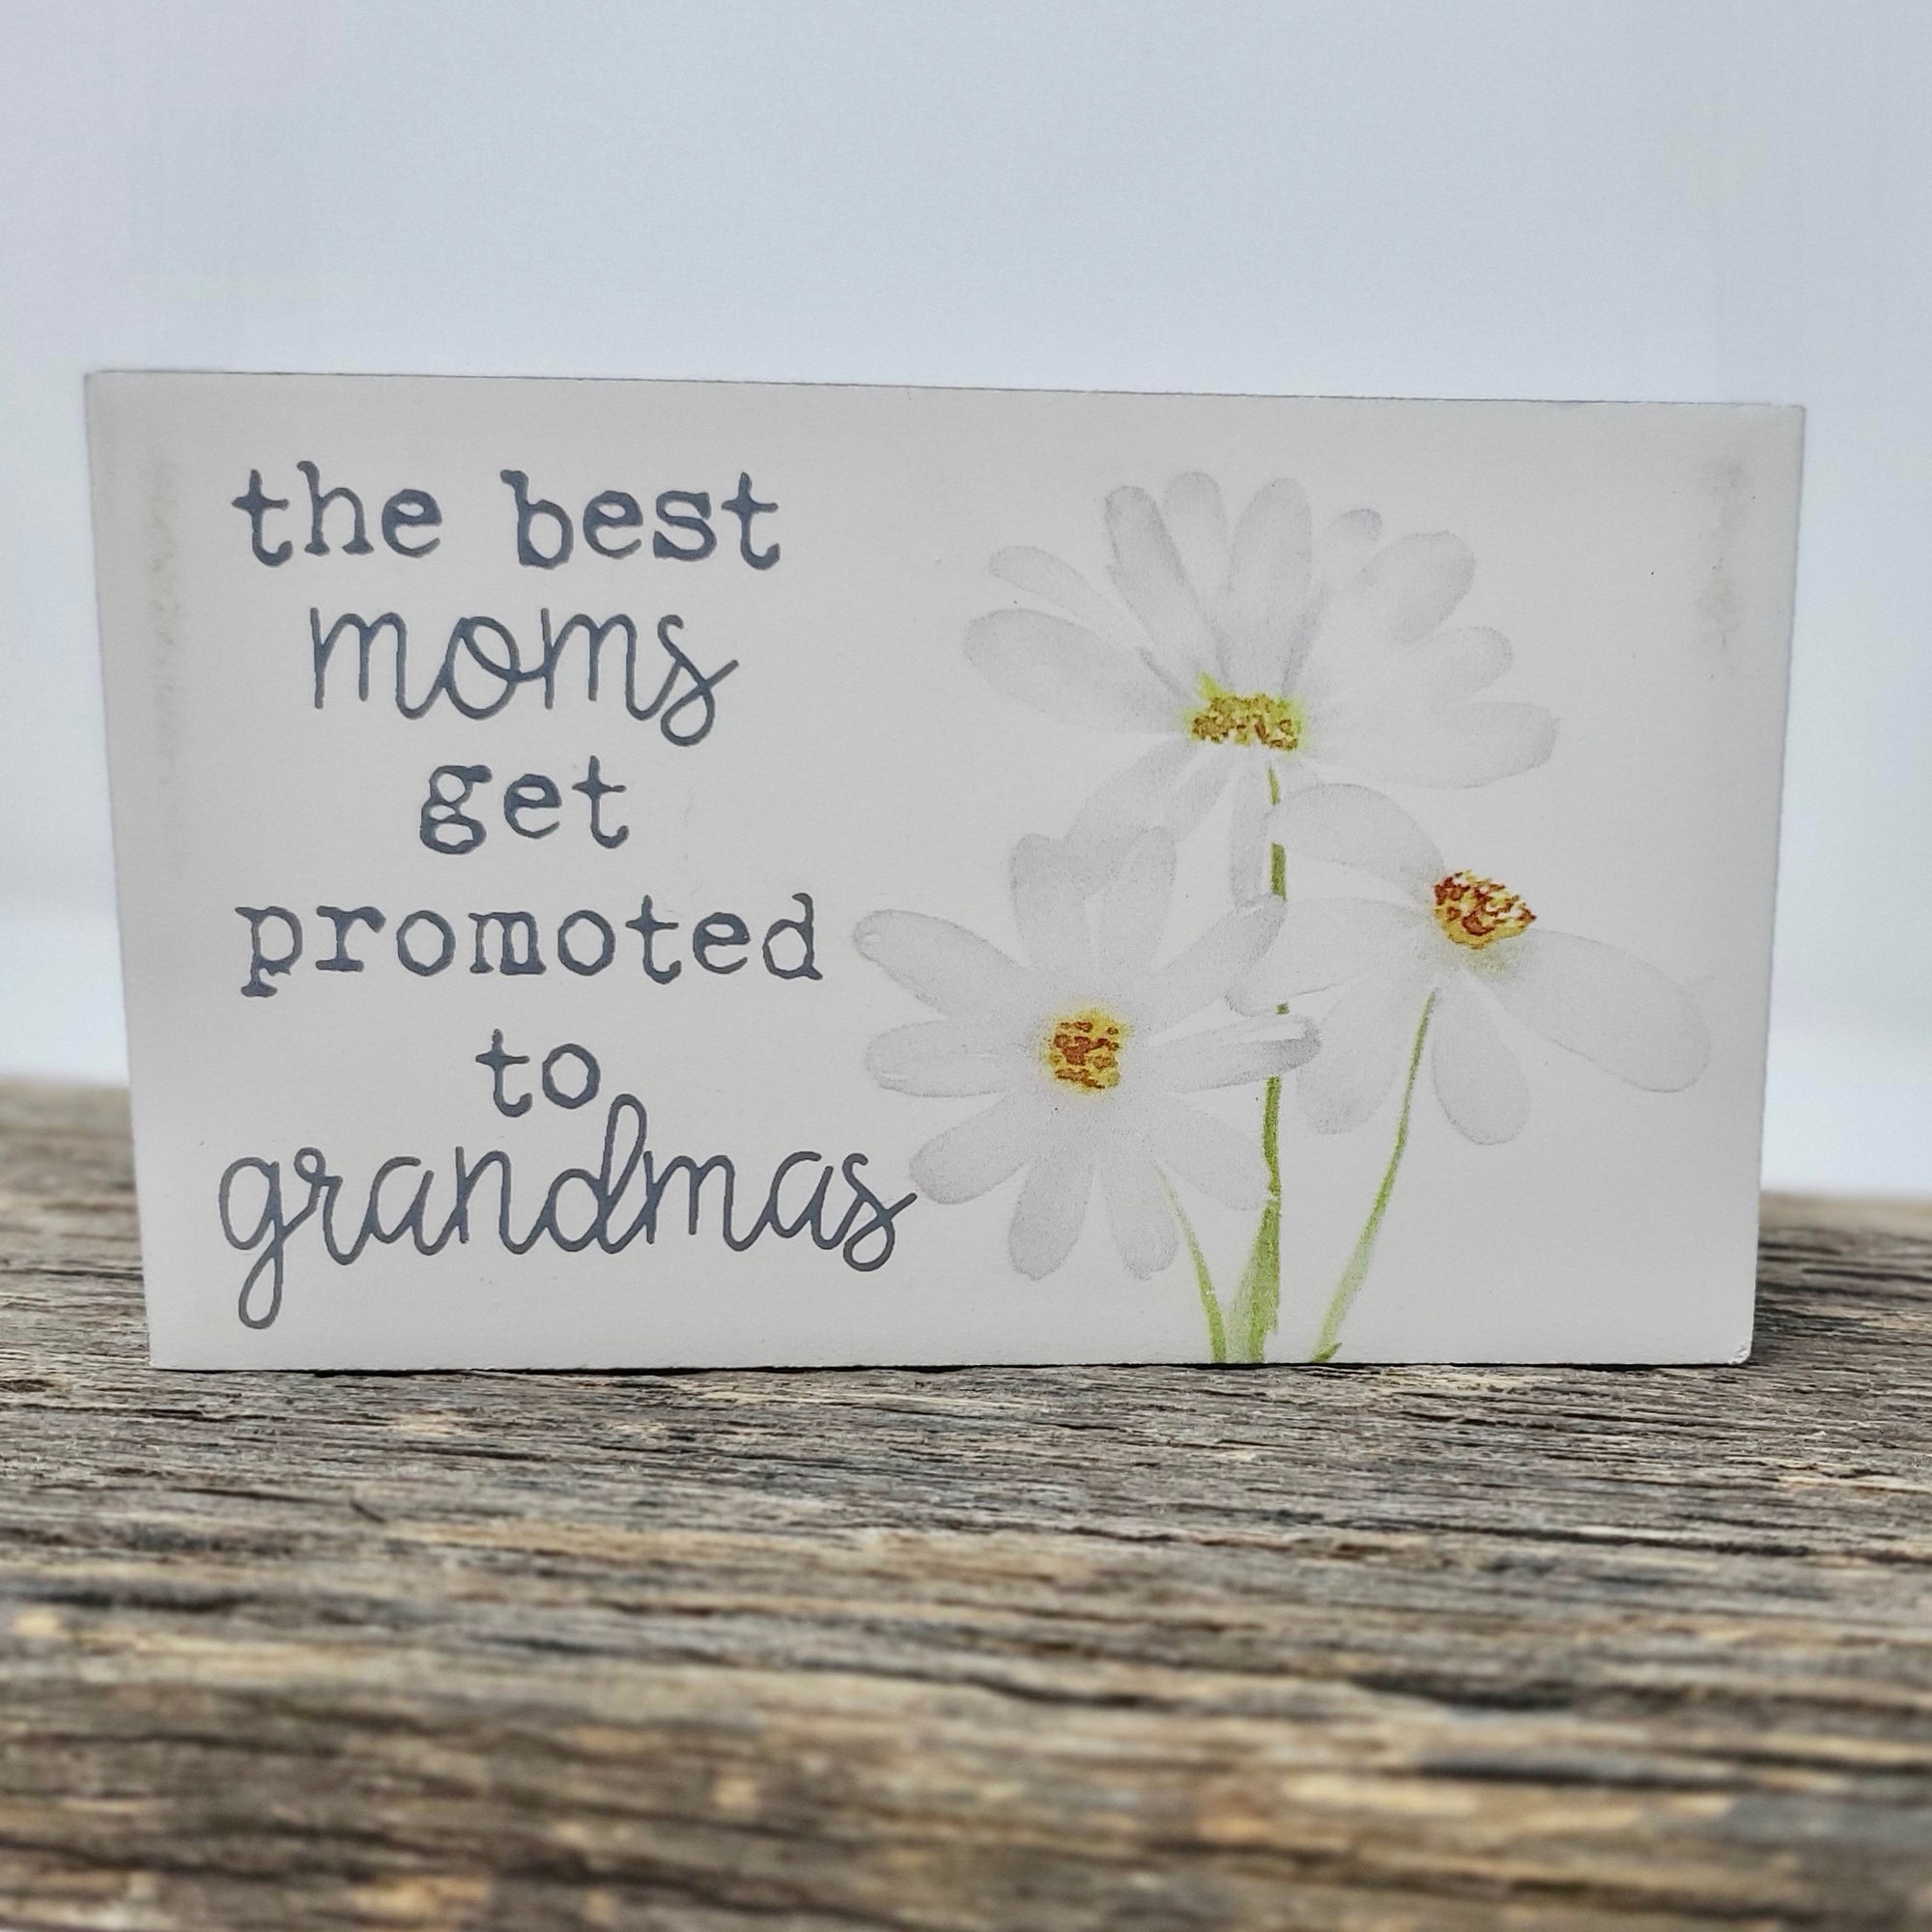 The Best Moms get Promoted to Grandmas Sign